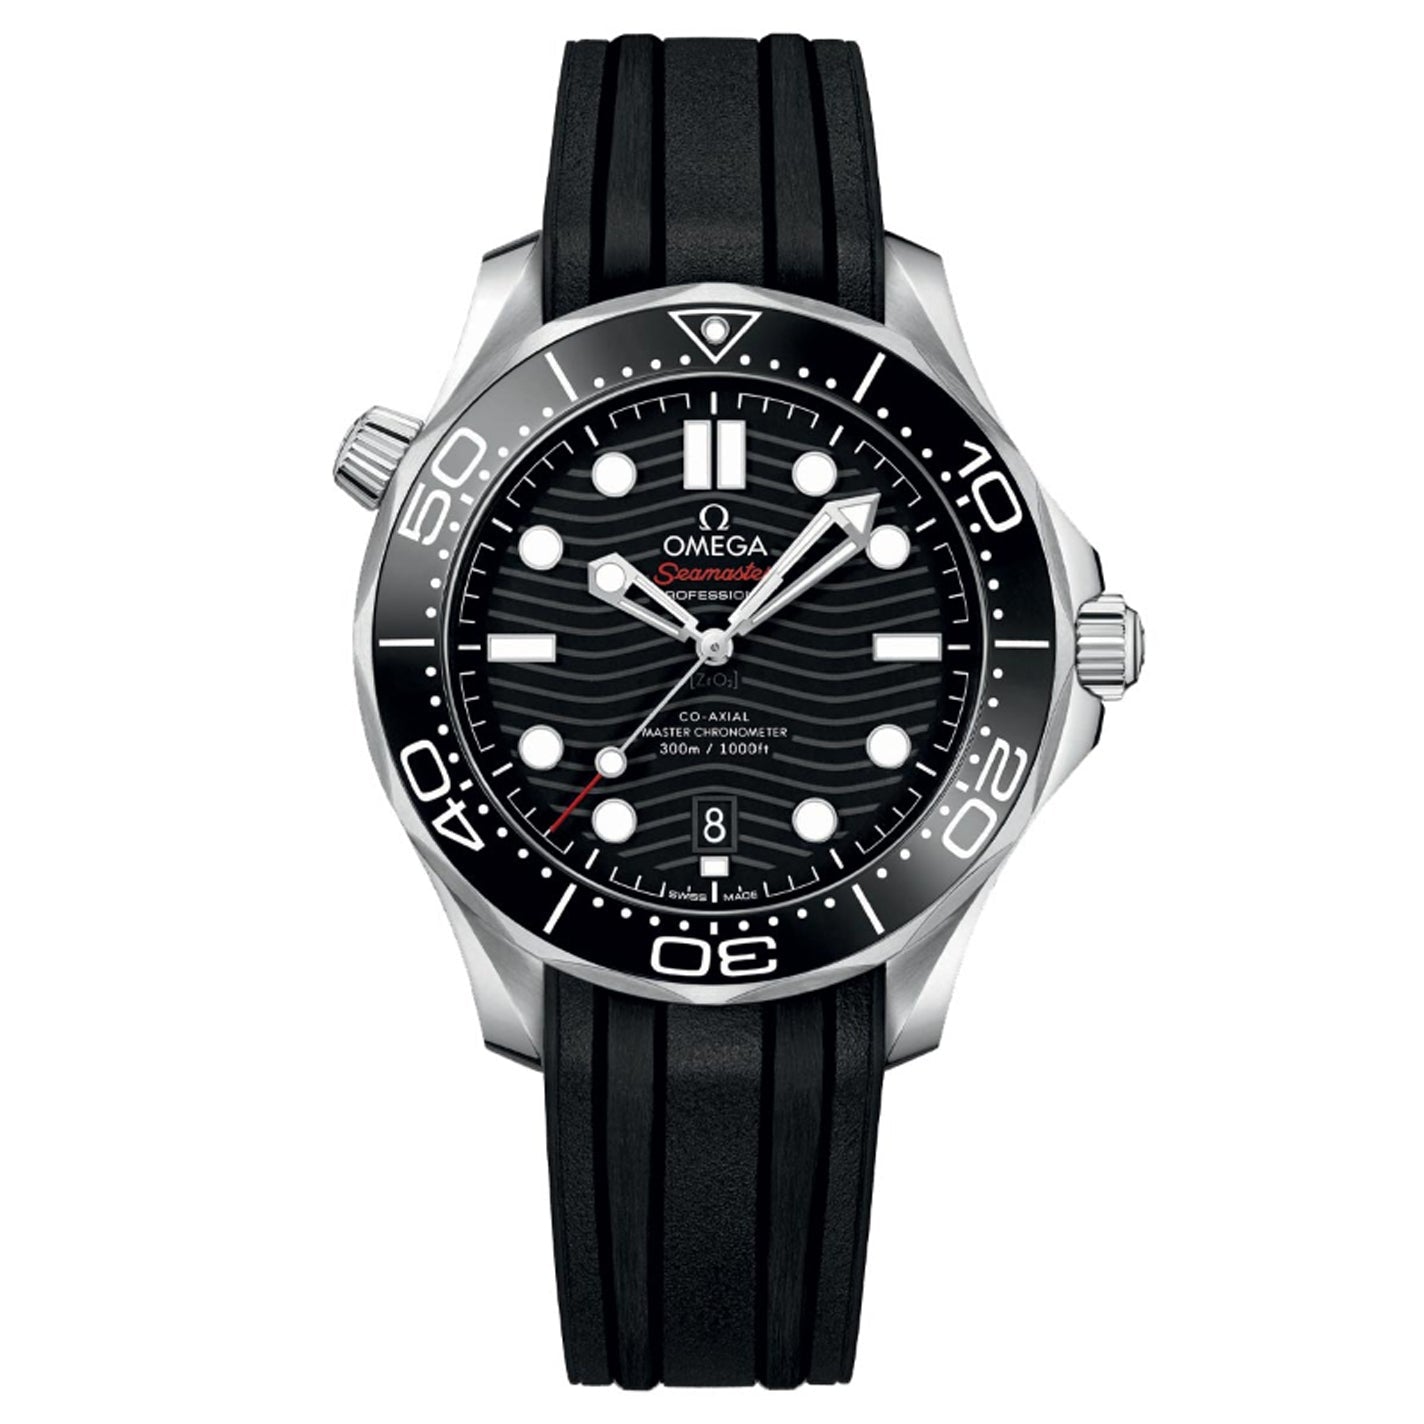 OMEGA Seamaster Diver 300M Co-Axial Master Chronometer 42mm Watch